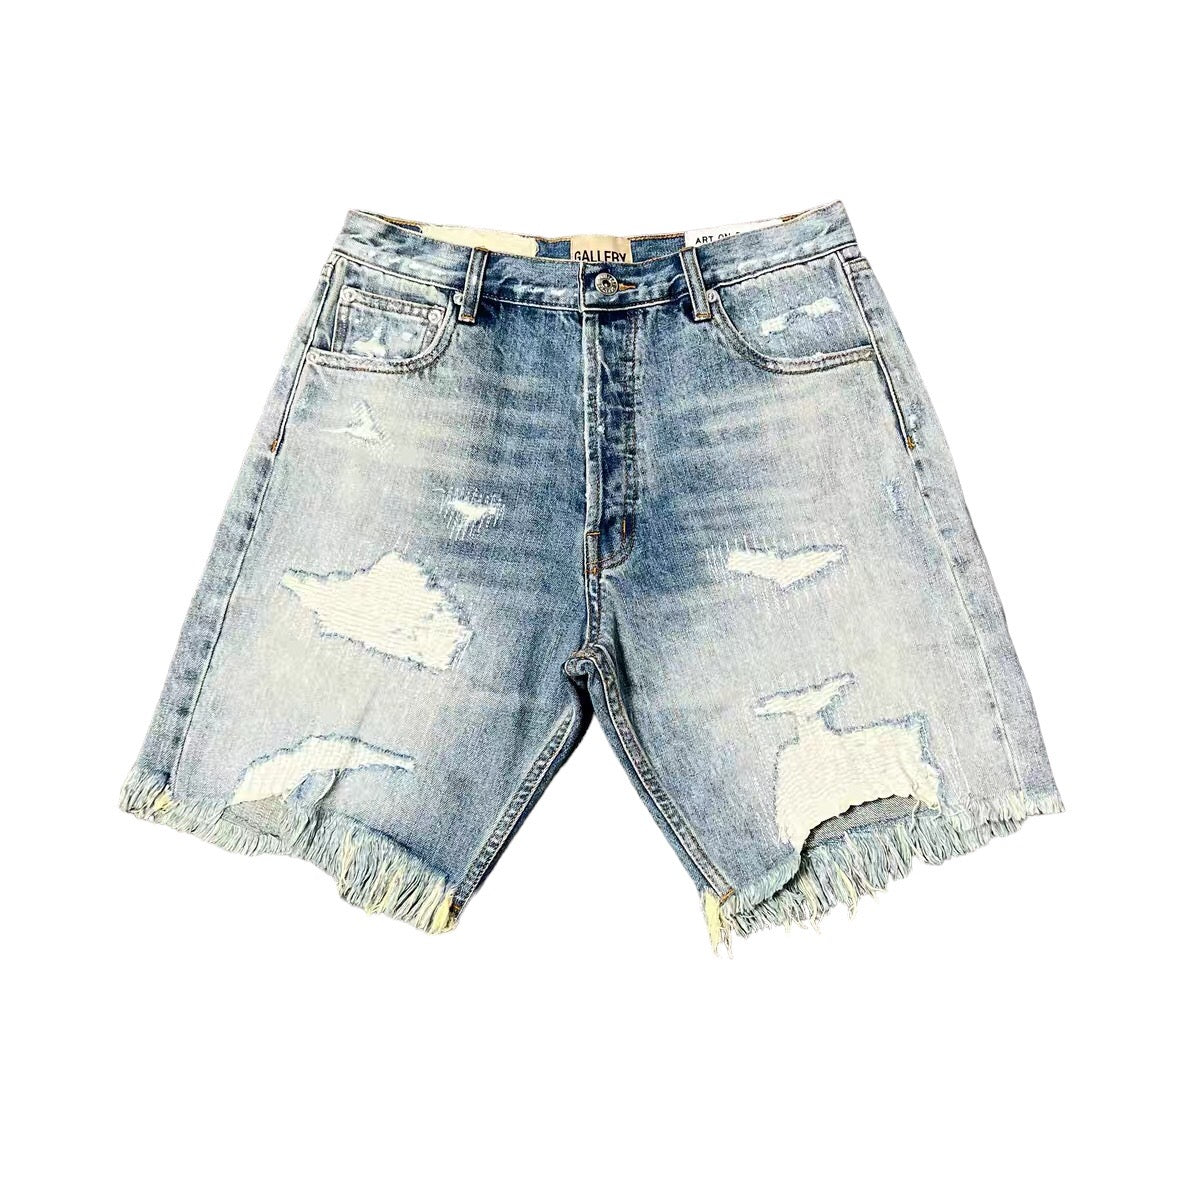 GALLERY DEPT. INDIANA SHORTS